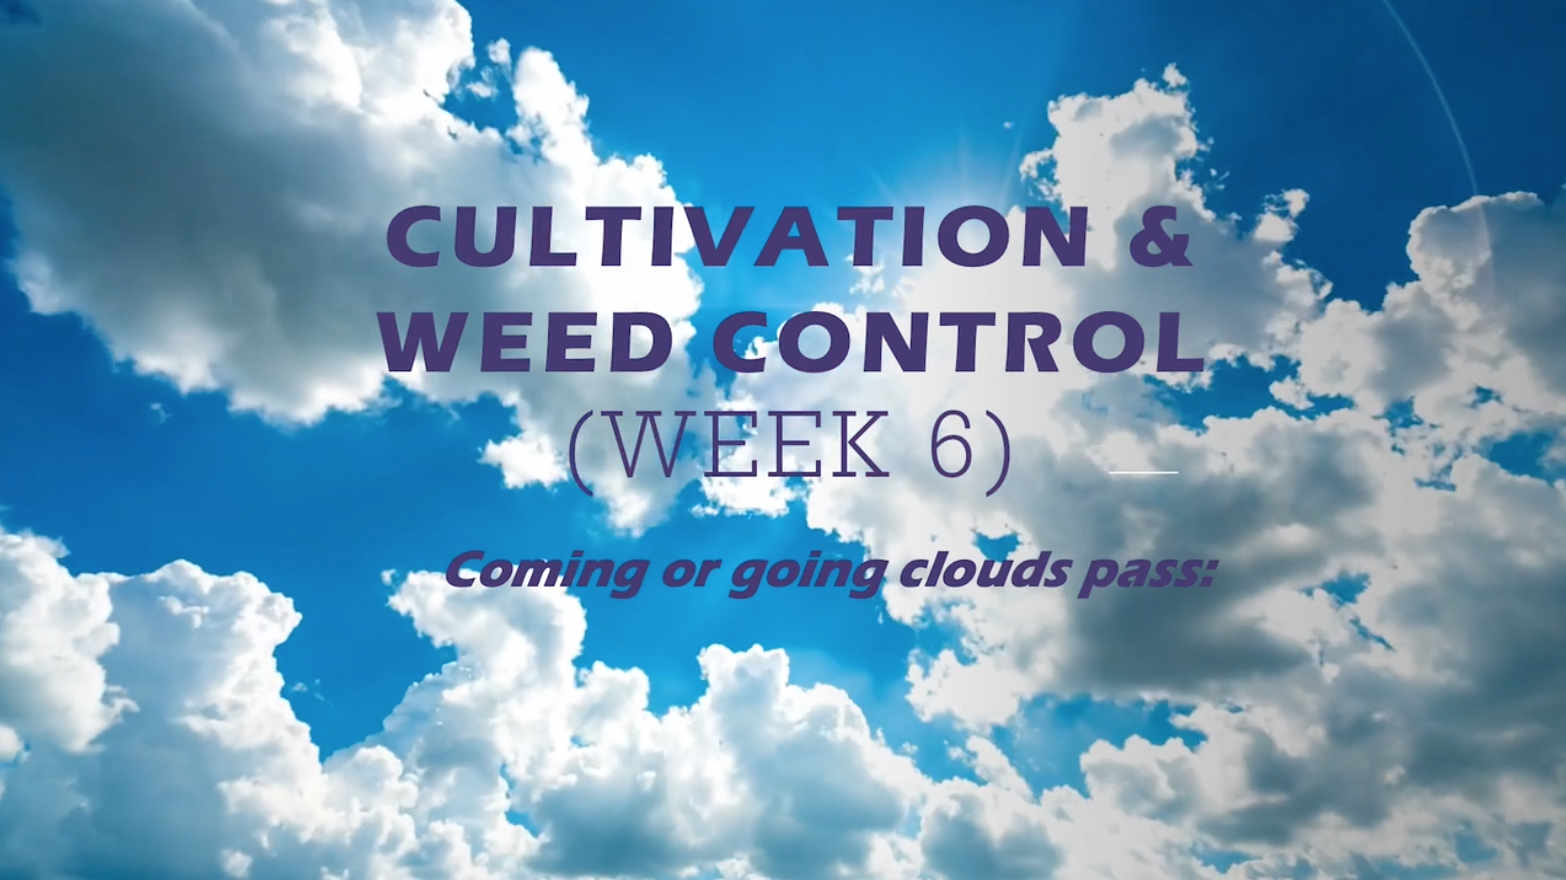 Class Instruction 6 - Cultivation and Weed Control